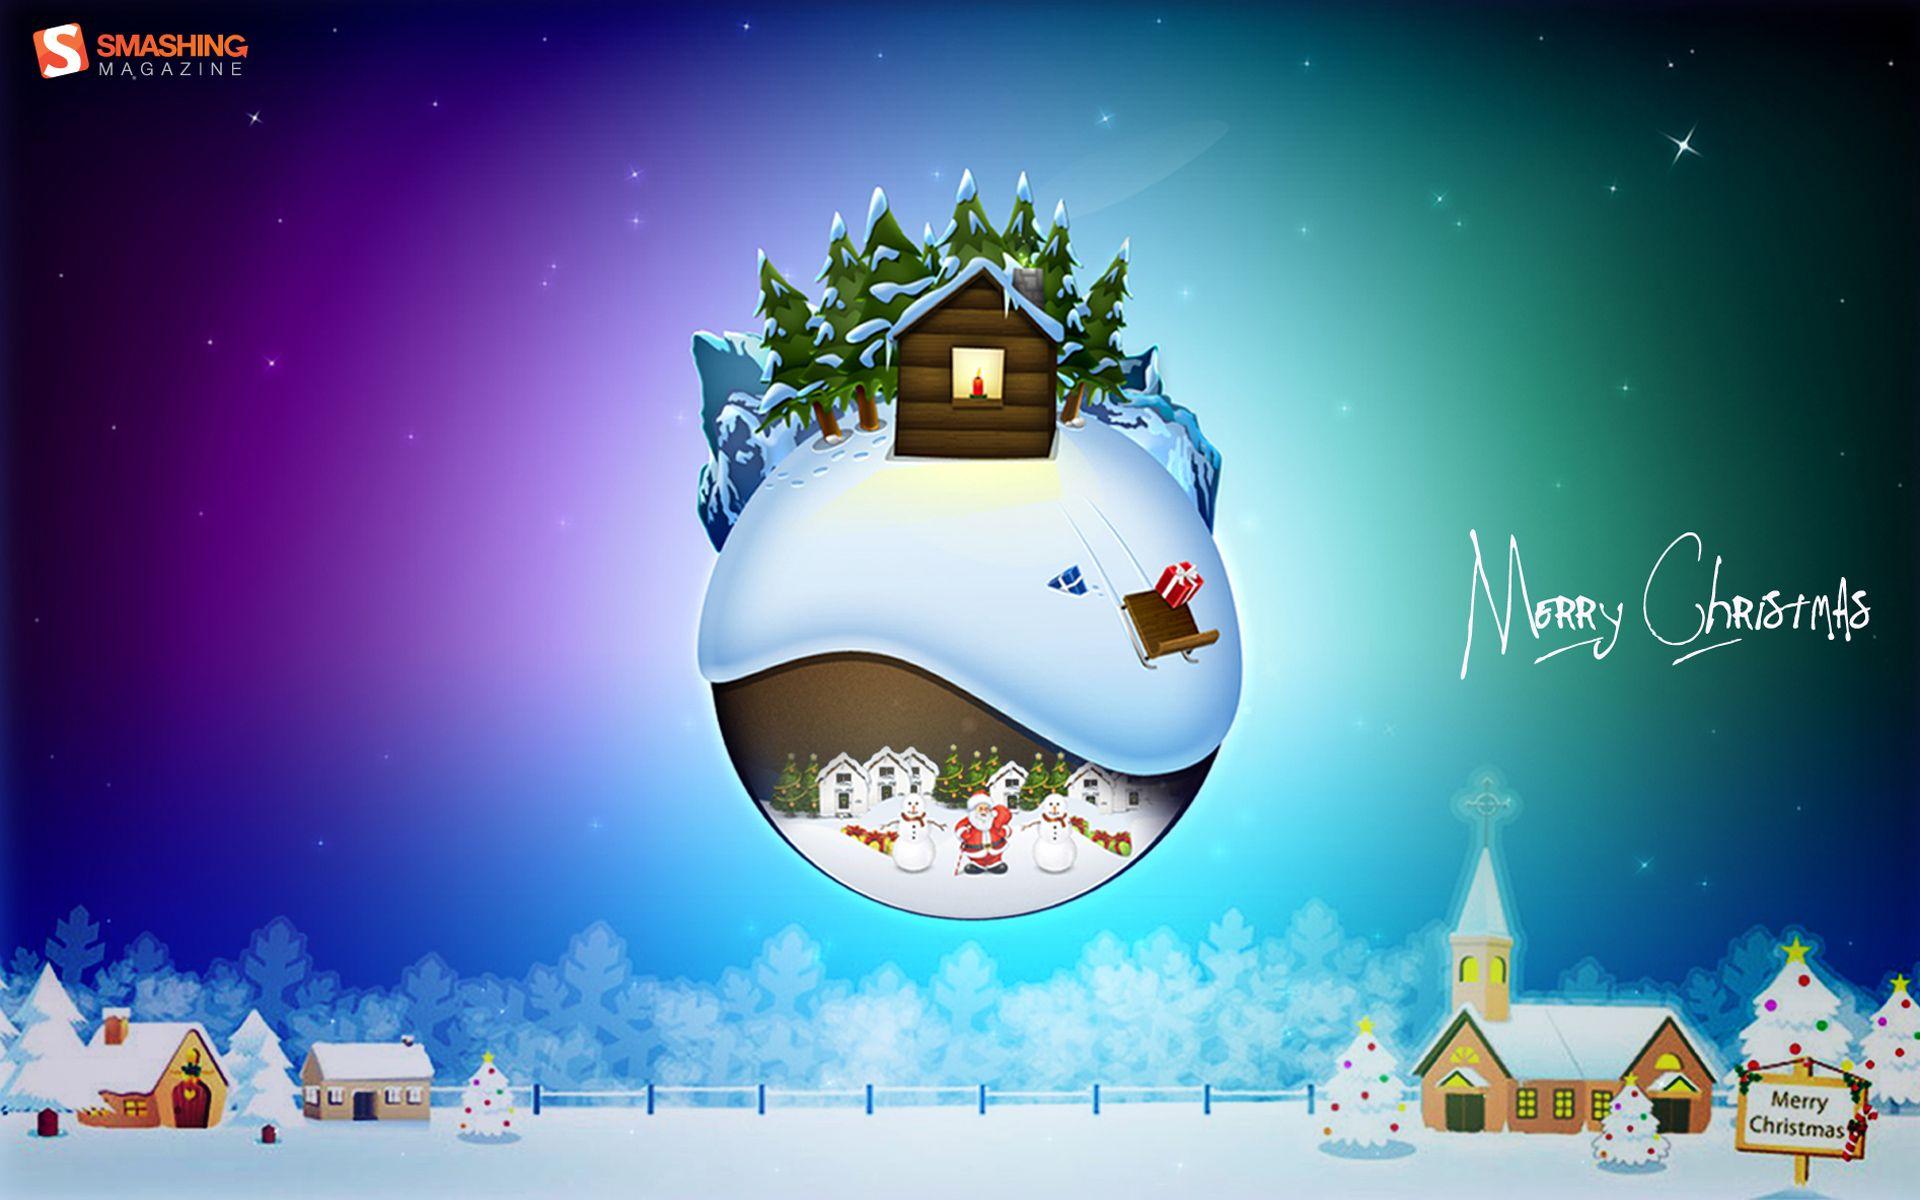 25 December Wallpapers Top Free 25 December Backgrounds Images, Photos, Reviews